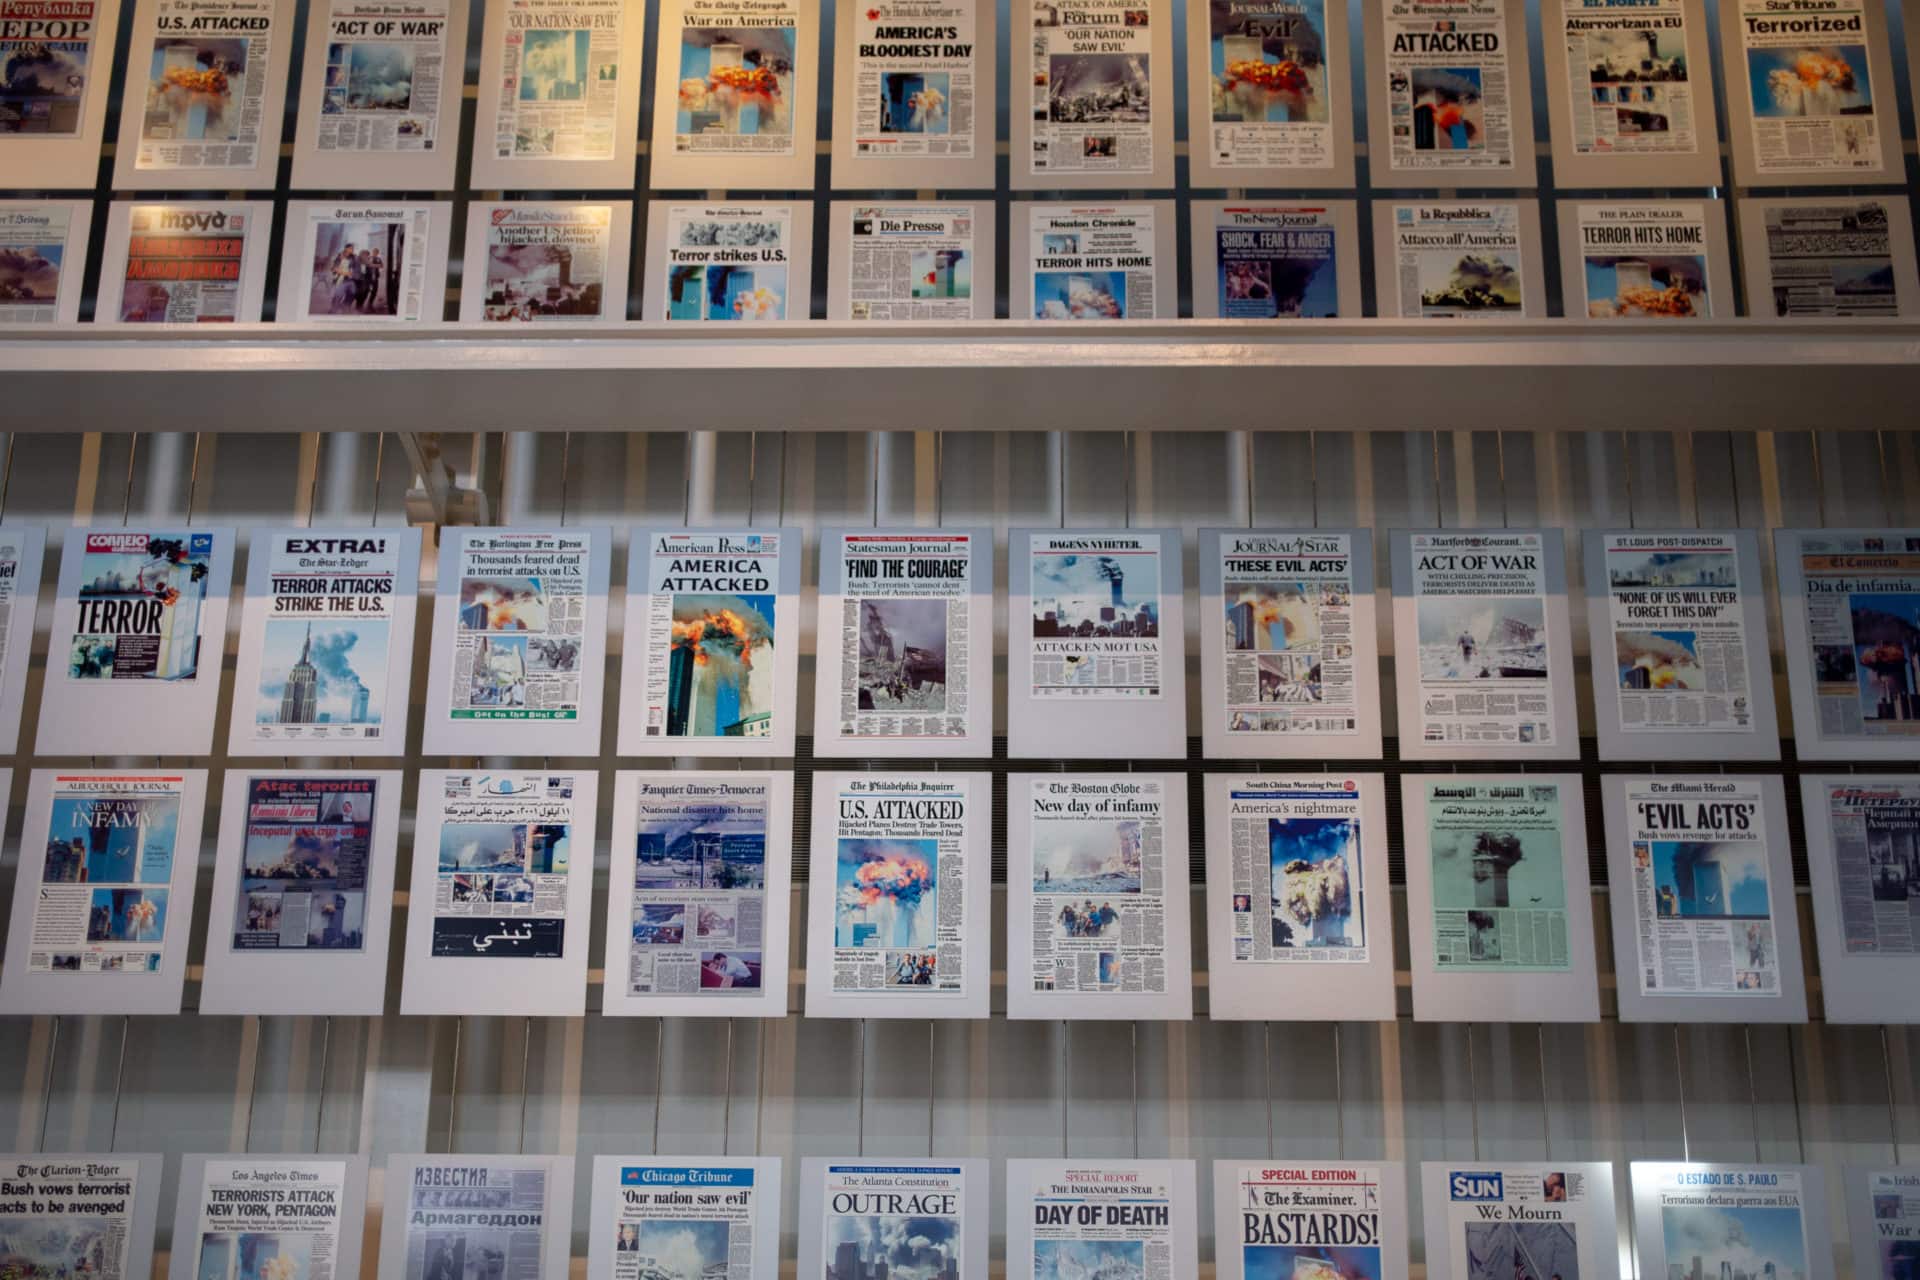 9/11 front pages.